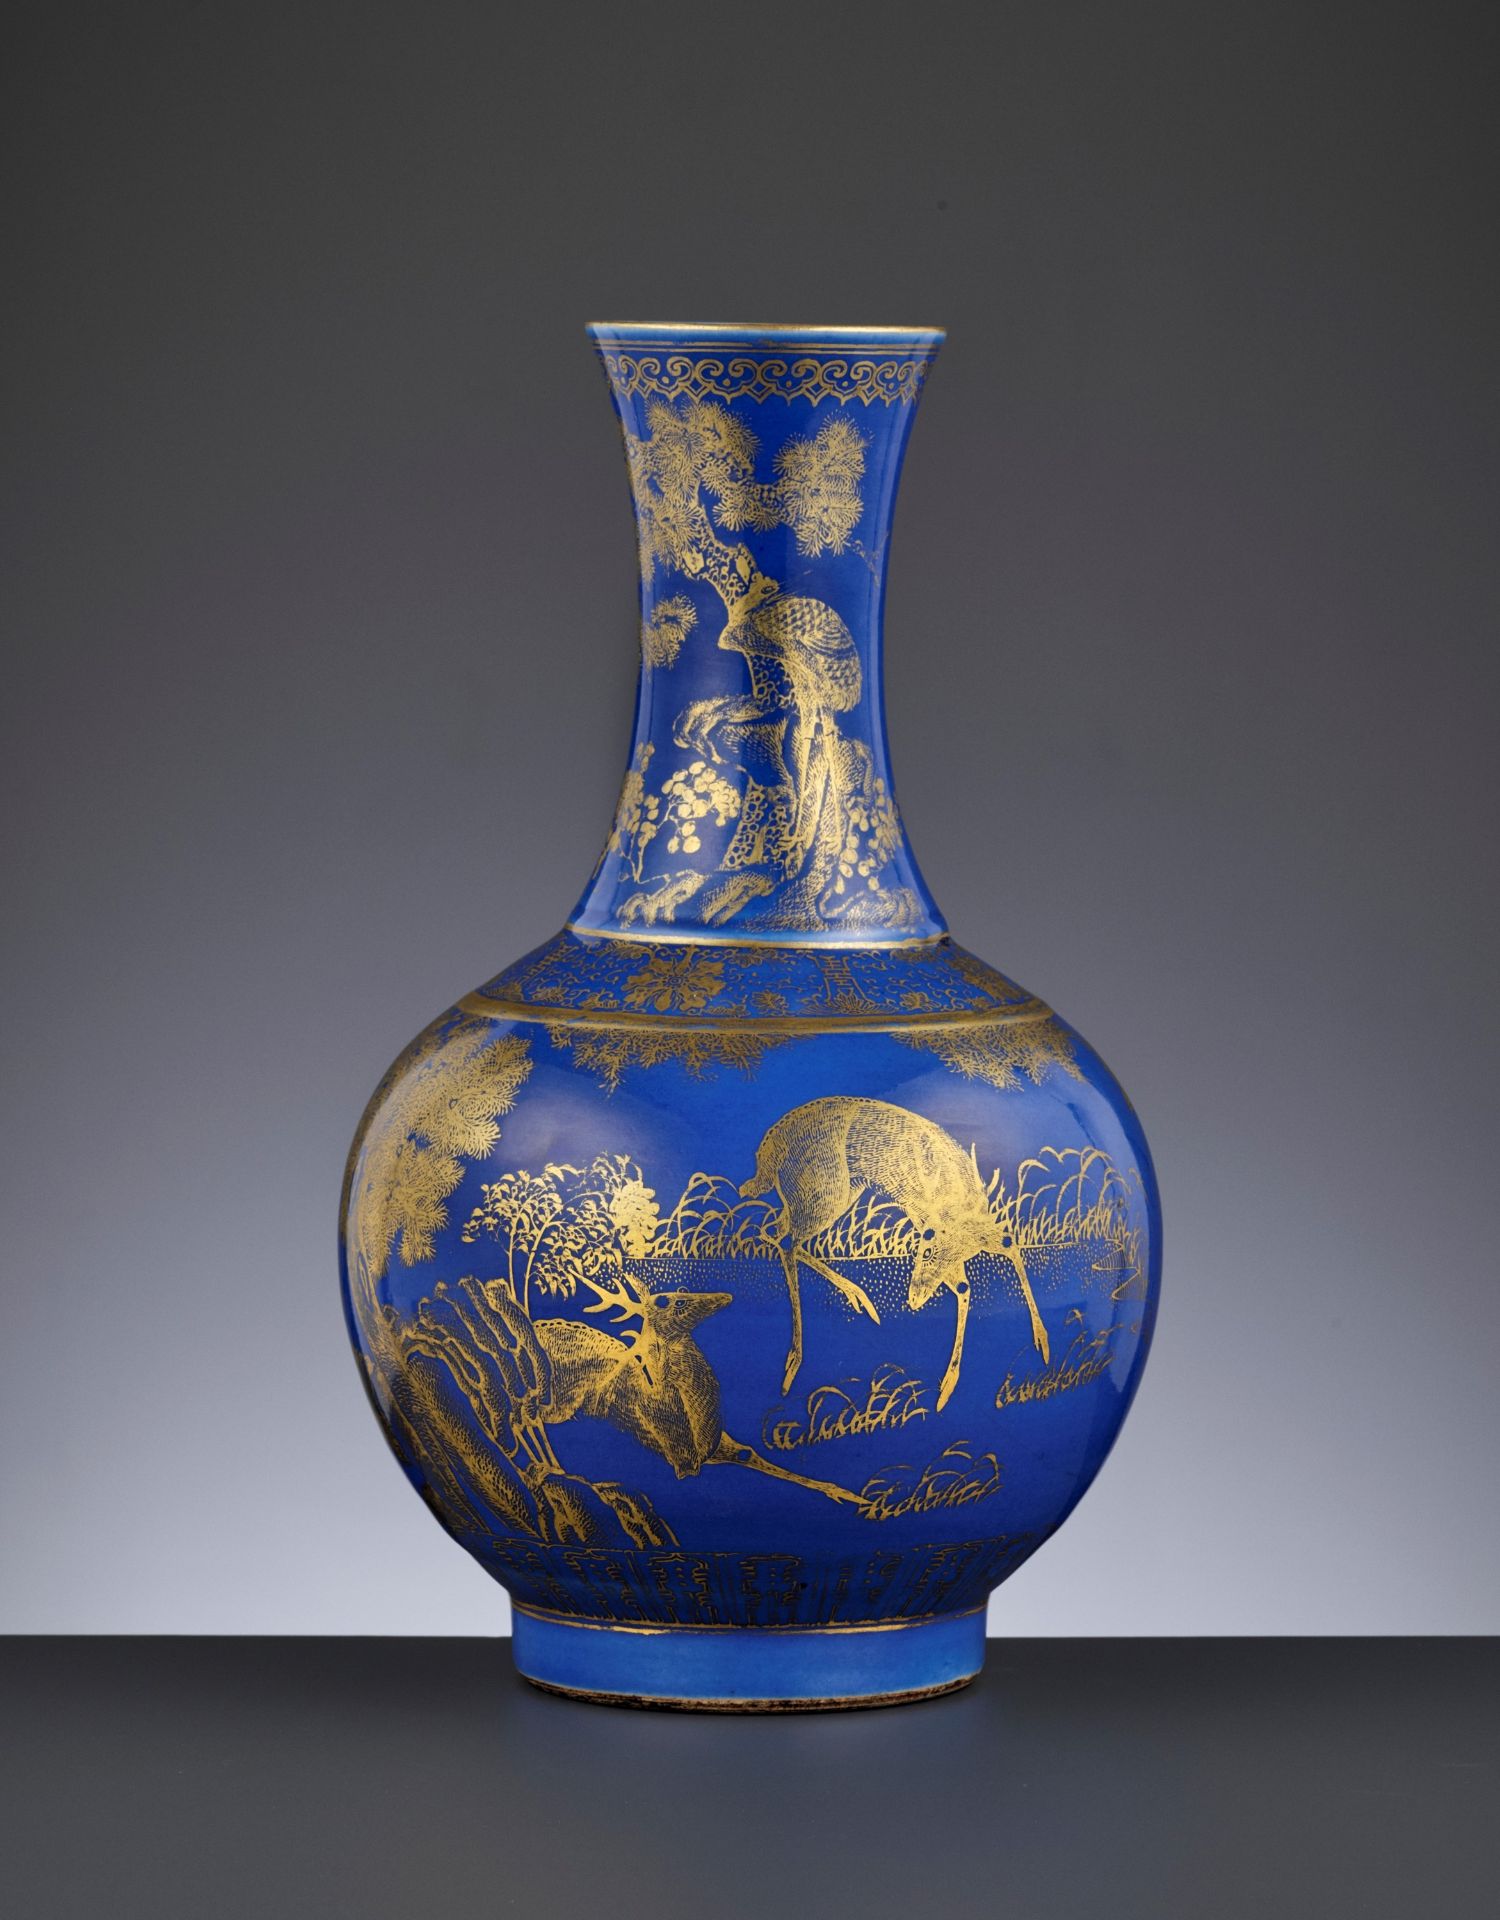 A POWDER-BLUE-GROUND GILT-DECORATED 'DEER AND CRANE' BOTTLE VASE, GUANGXU MARK AND PERIOD